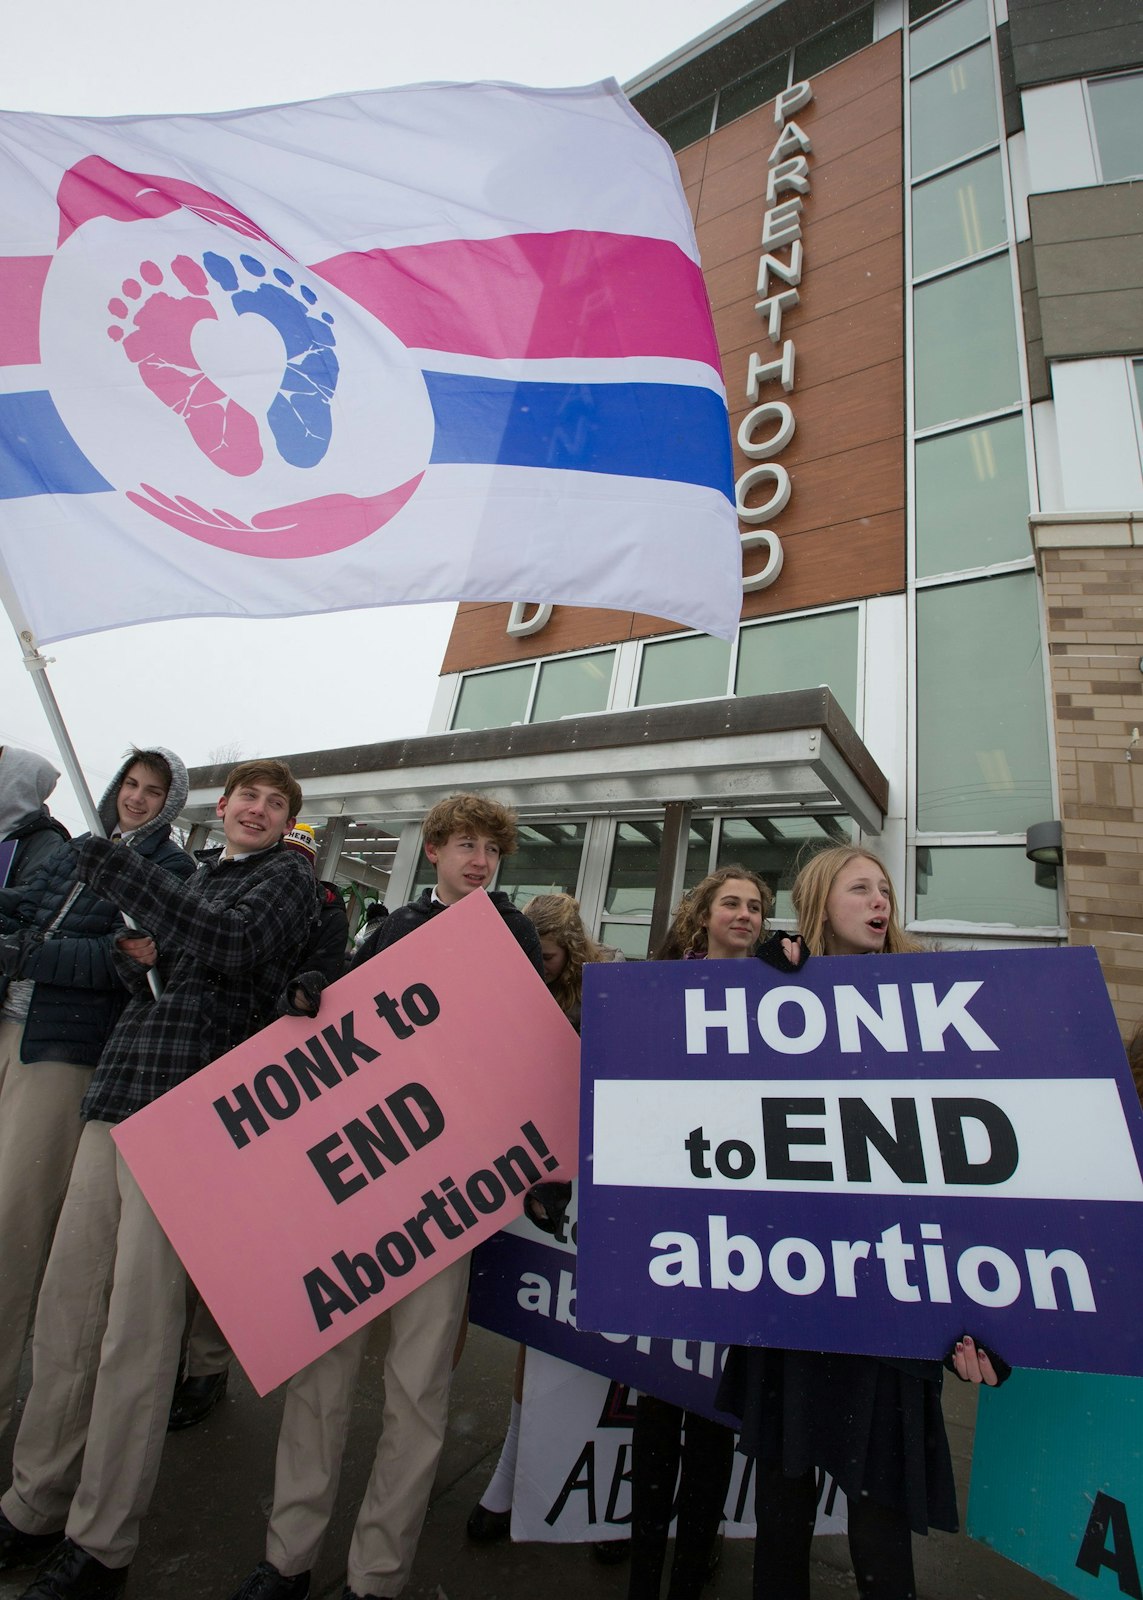 Students from Chesterton Academy in Hopkins, Minn., pray the rosary at Planned Parenthood in St. Paul Jan. 5, 2022. A group of 40 students goes every week to stand up for life at the abortion facility, calling themselves "Crusaders for Life." (CNS photo/Dave Hrbacek, The Catholic Spirit)